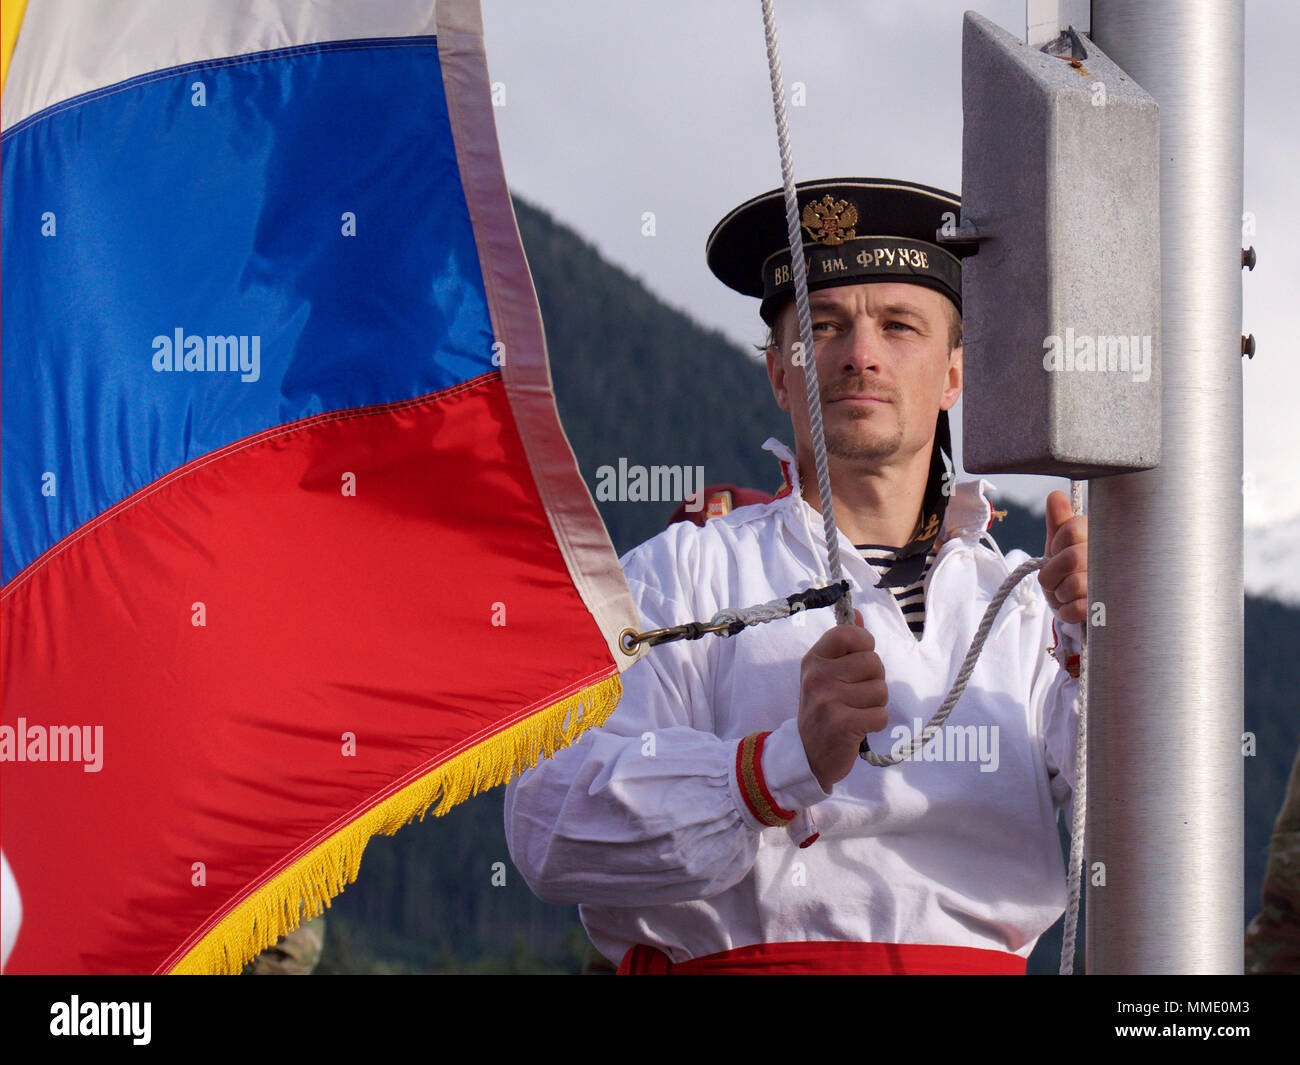 Roman Sorokin, portraying a Russian sailor, lowers the Russian flag at Castle Hill, Sitka, Alaska, during the Oct. 18, 2017, reenactment of the transfer of Alaska from Russia to the United States. This year marks 150 years since the Oct. 18, 1867, transfer ceremony. (U.S. Army National Guard photo by Sgt. David Bedard/released) Stock Photo